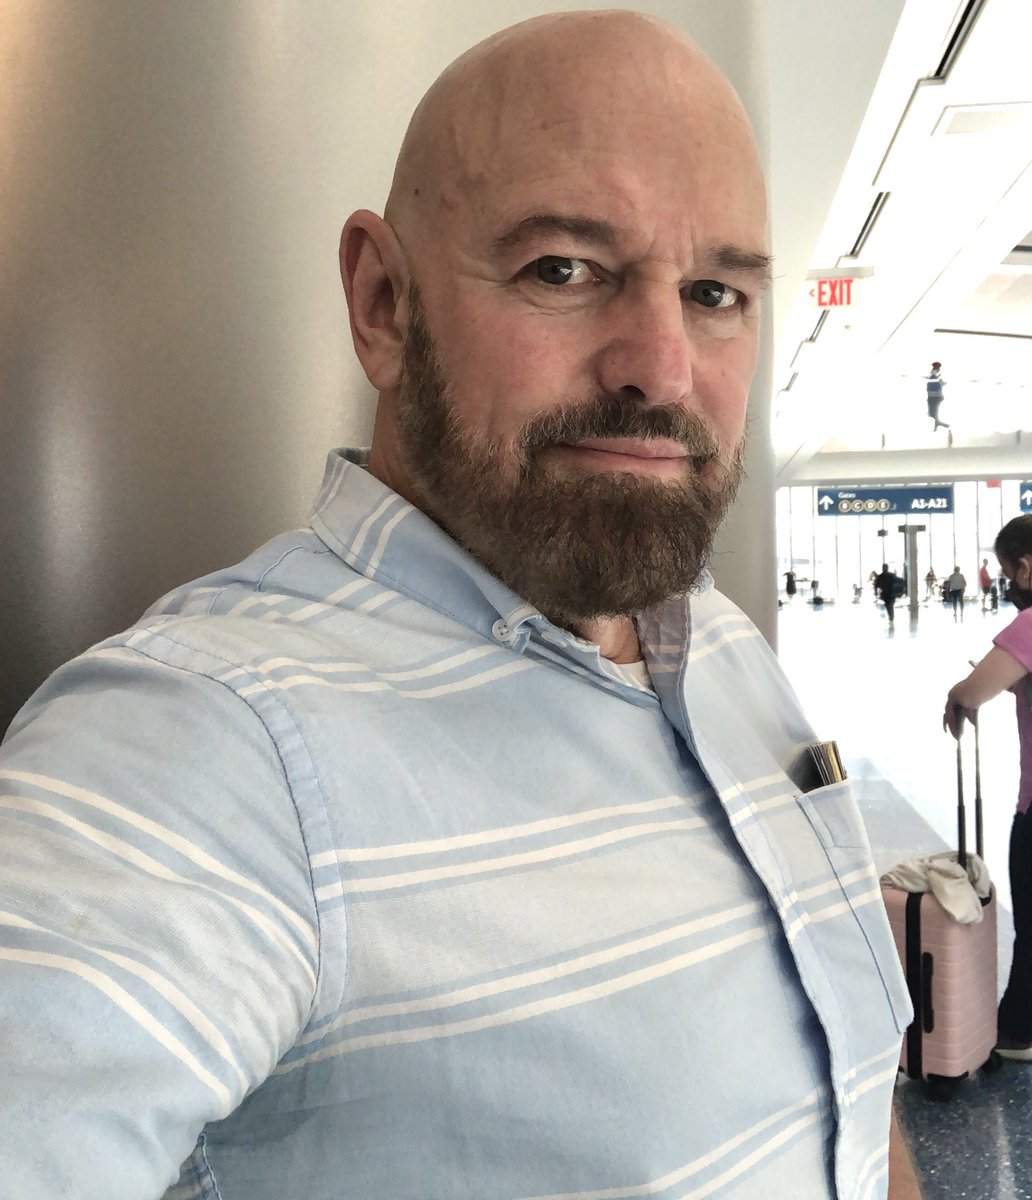 Crazy flight delays, but I’m off to Africa for a 2-week work trip. Give your best hotel-room, body-weight workouts - hoping not to lose the gains! #100club100 #oldmanfitness #worktravel #travelfitness